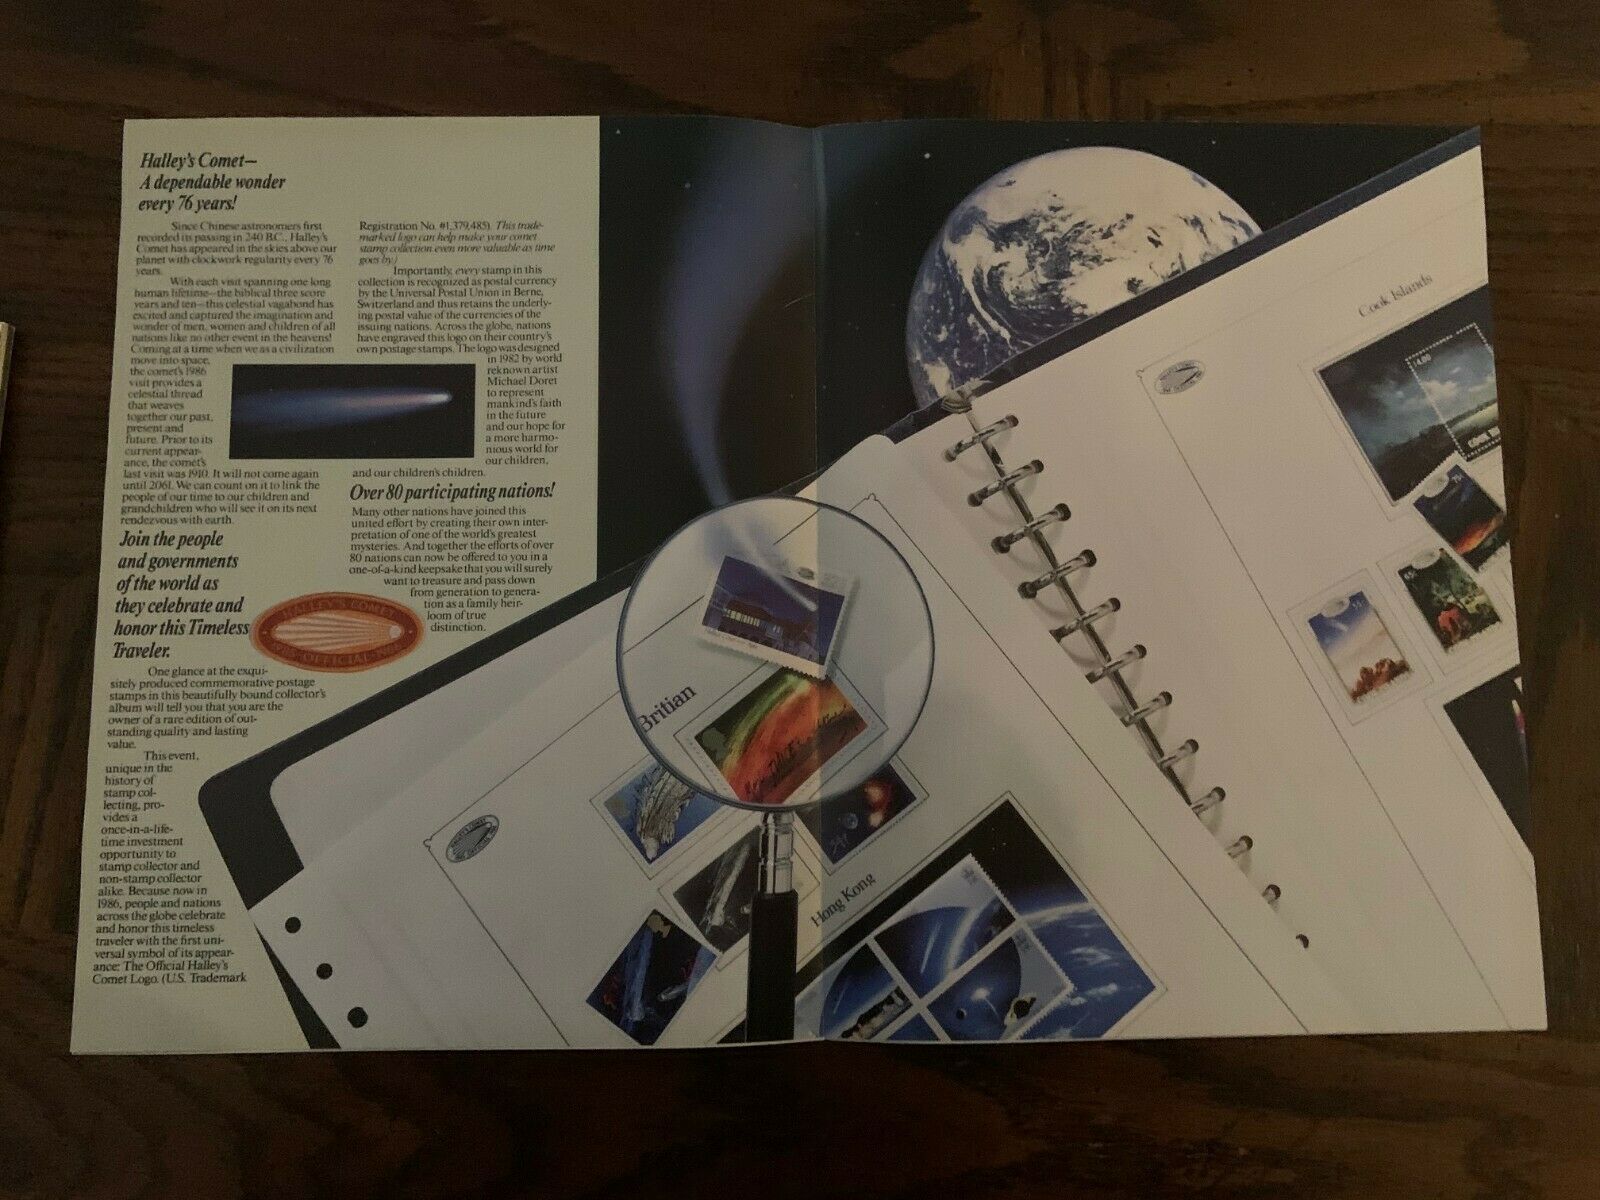 40 Official Halley's Comet First Day Covers + Other Halley's Comet Collectibles